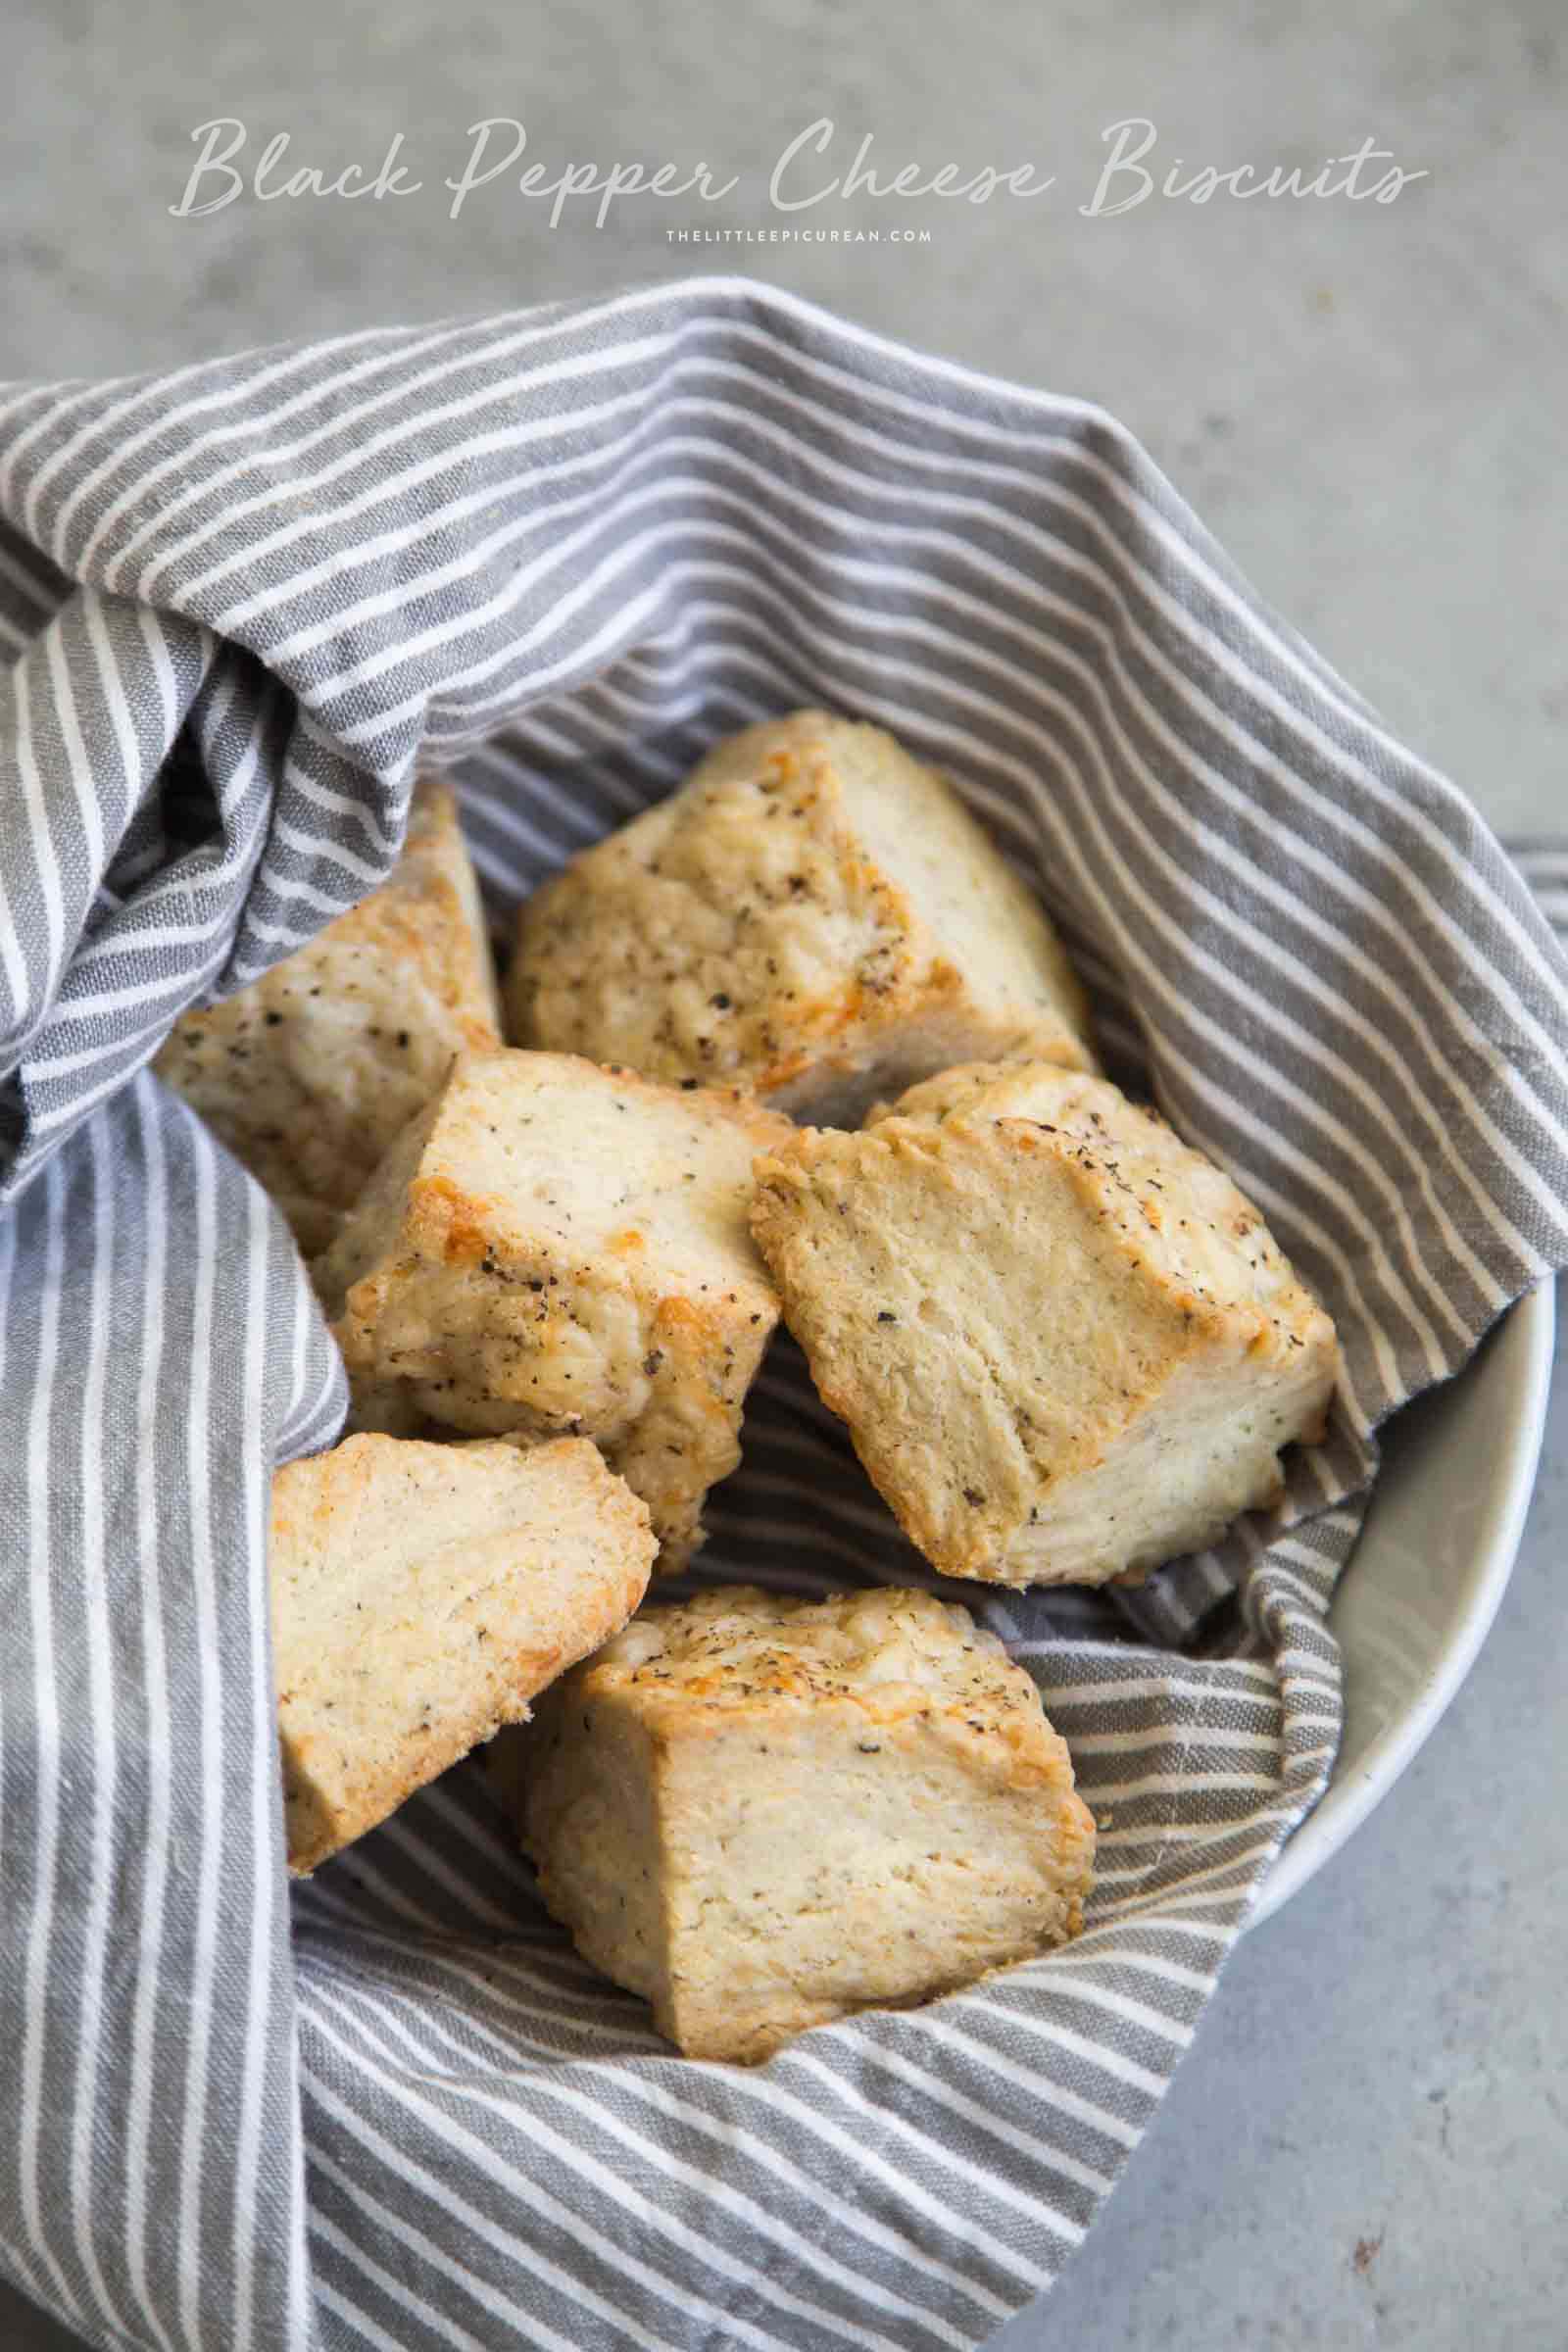 Black Pepper Cheese Biscuits